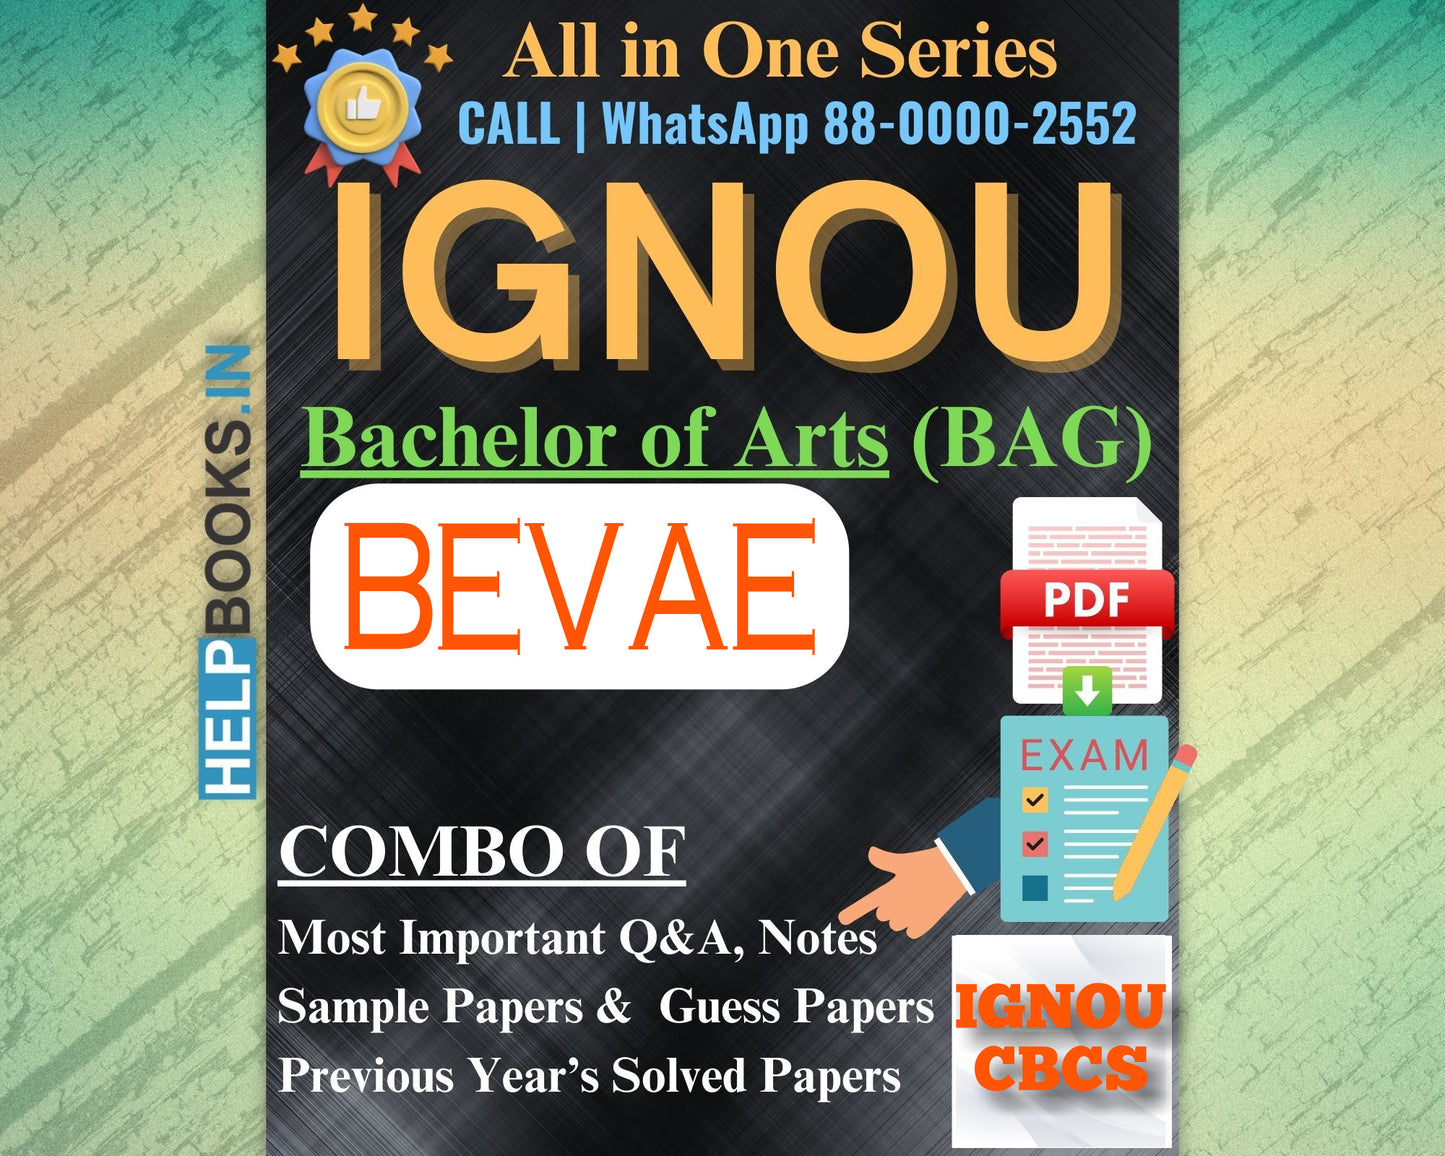 IGNOU BAG Online Study Package: Bachelor of Arts (BA) - Previous Years Solved Papers, Q&A, Exam Notes, Sample Papers, Guess Papers-BEVAE181